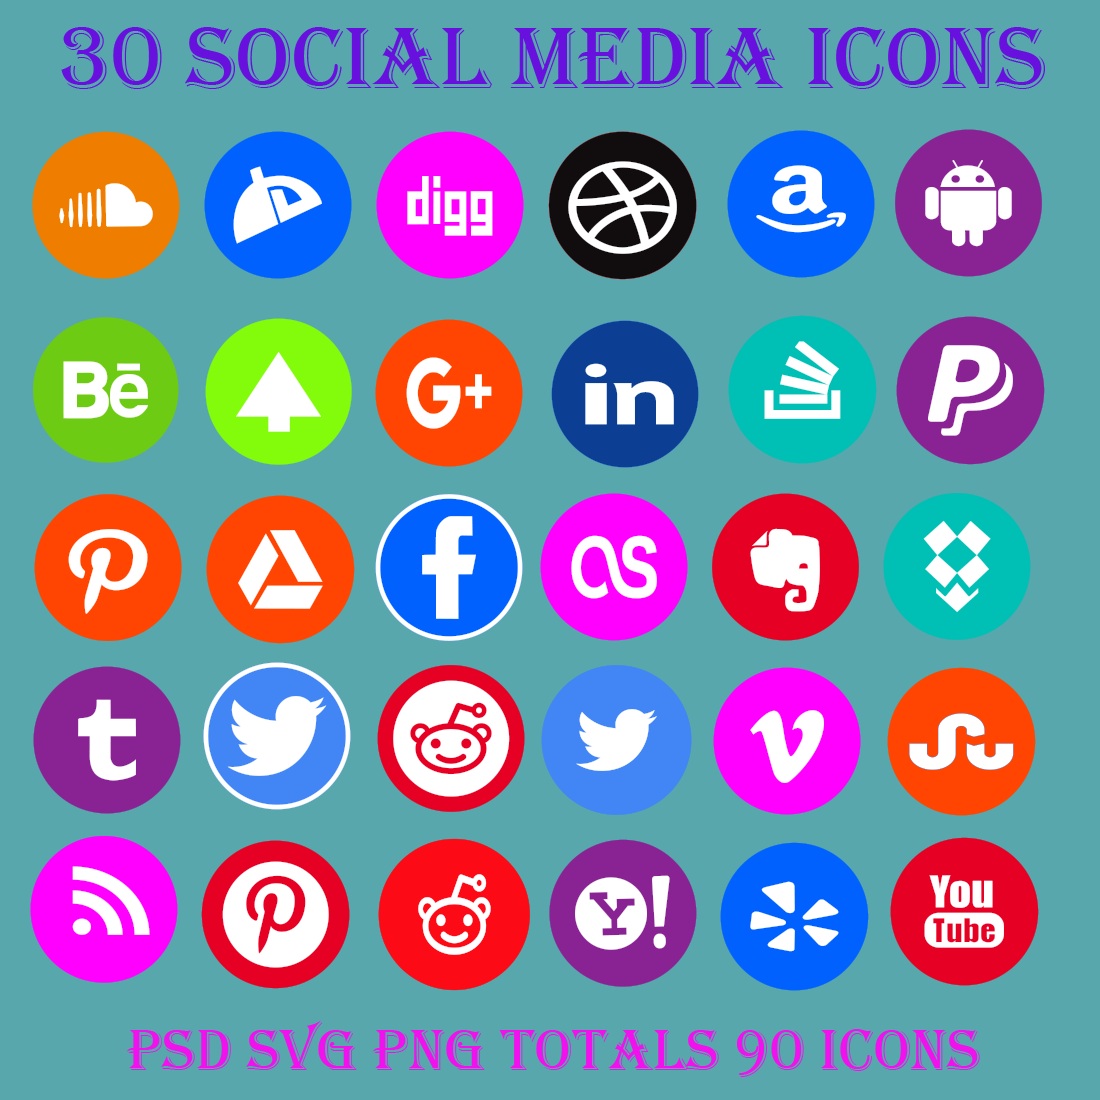 Round Social Media Icons cover images.